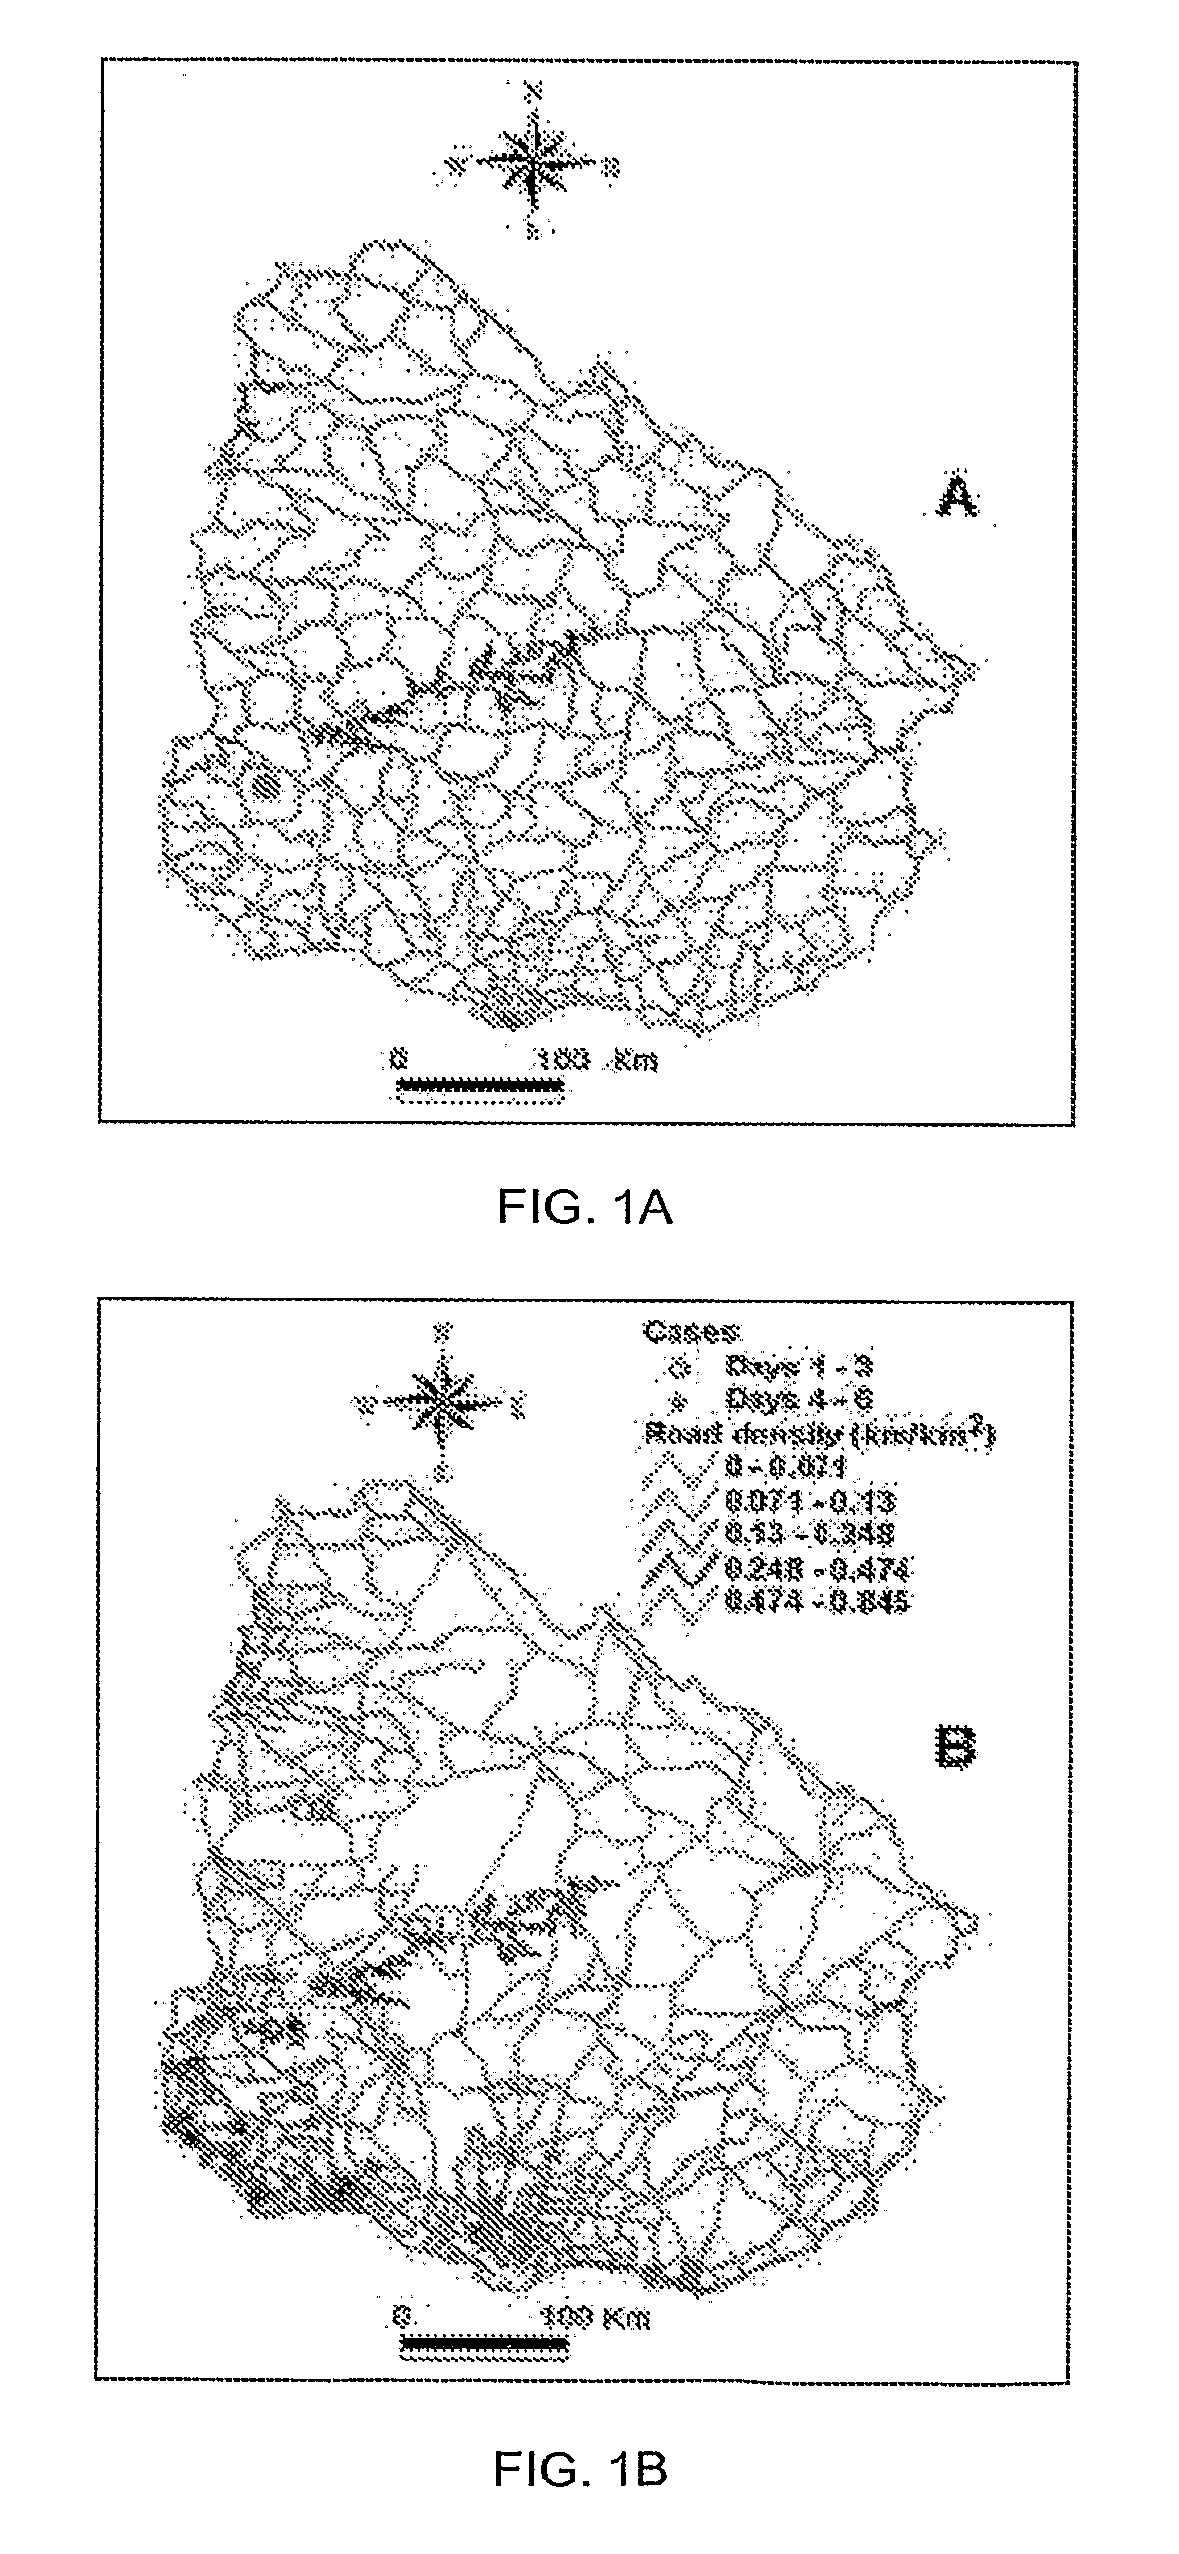 Method of identifying clusters and connectivity between clusters